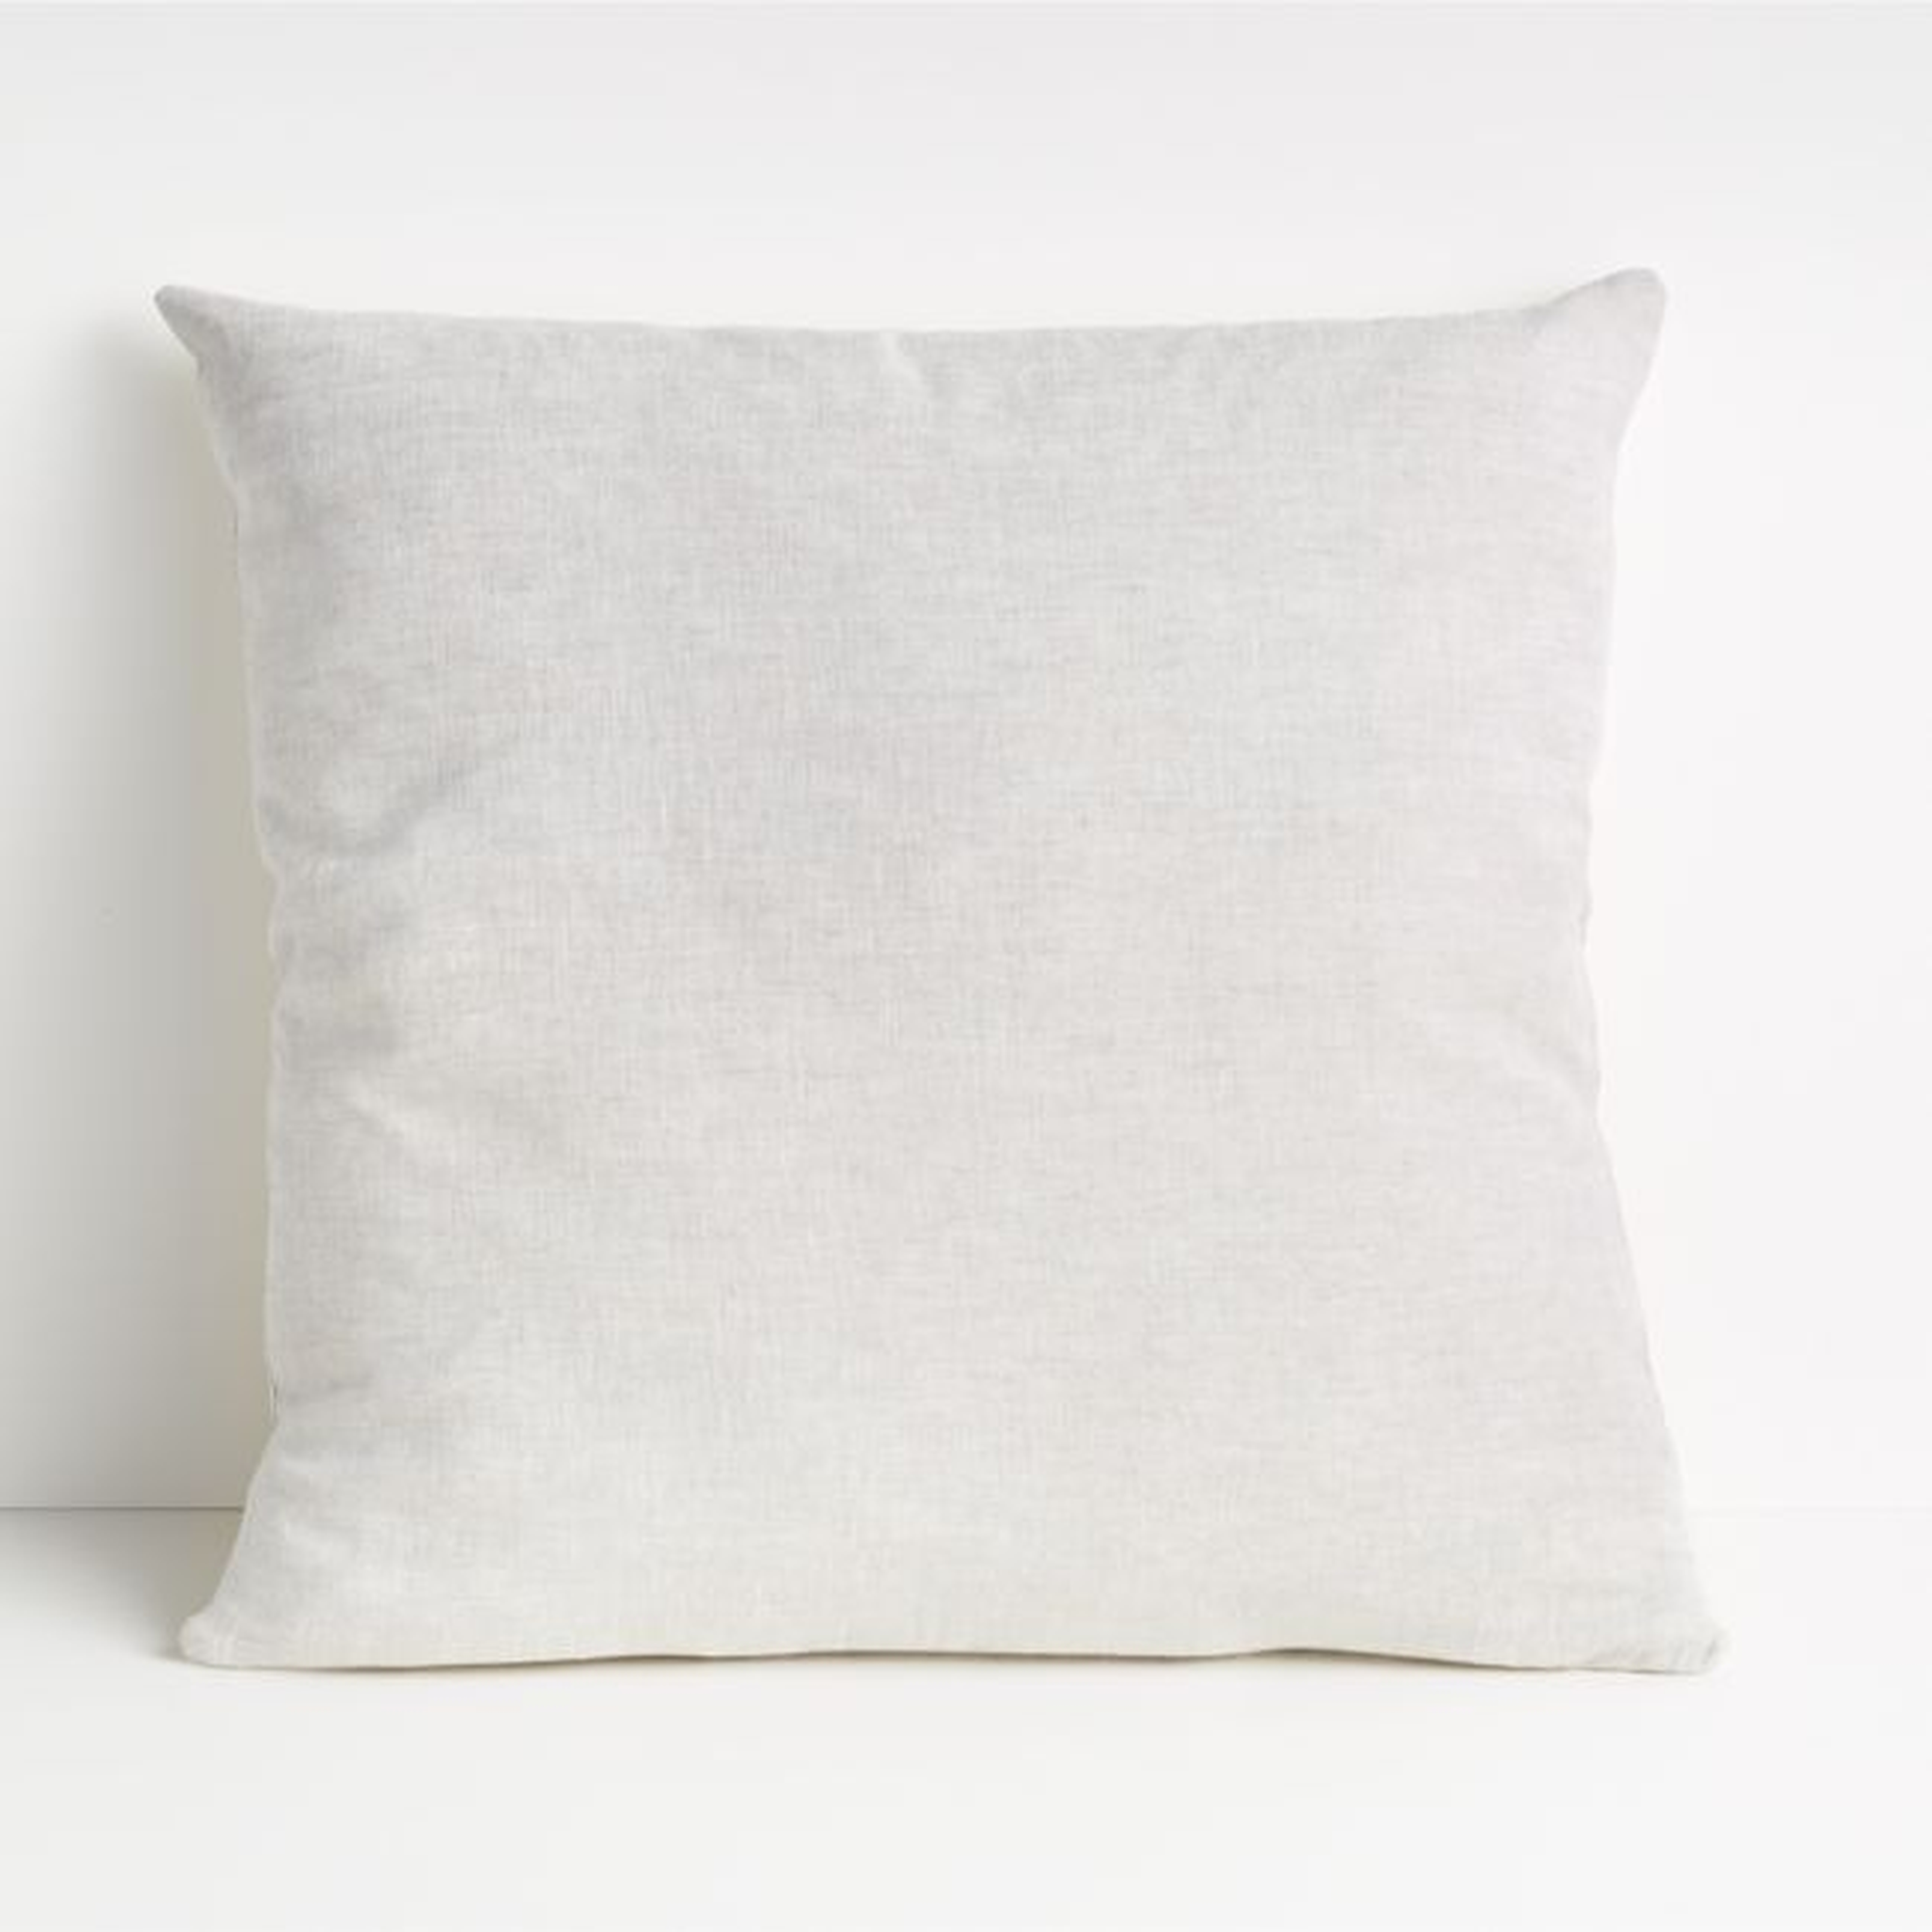 Parachute Linen Natural 20"x20" Chambray Throw Pillow Cover - Crate and Barrel